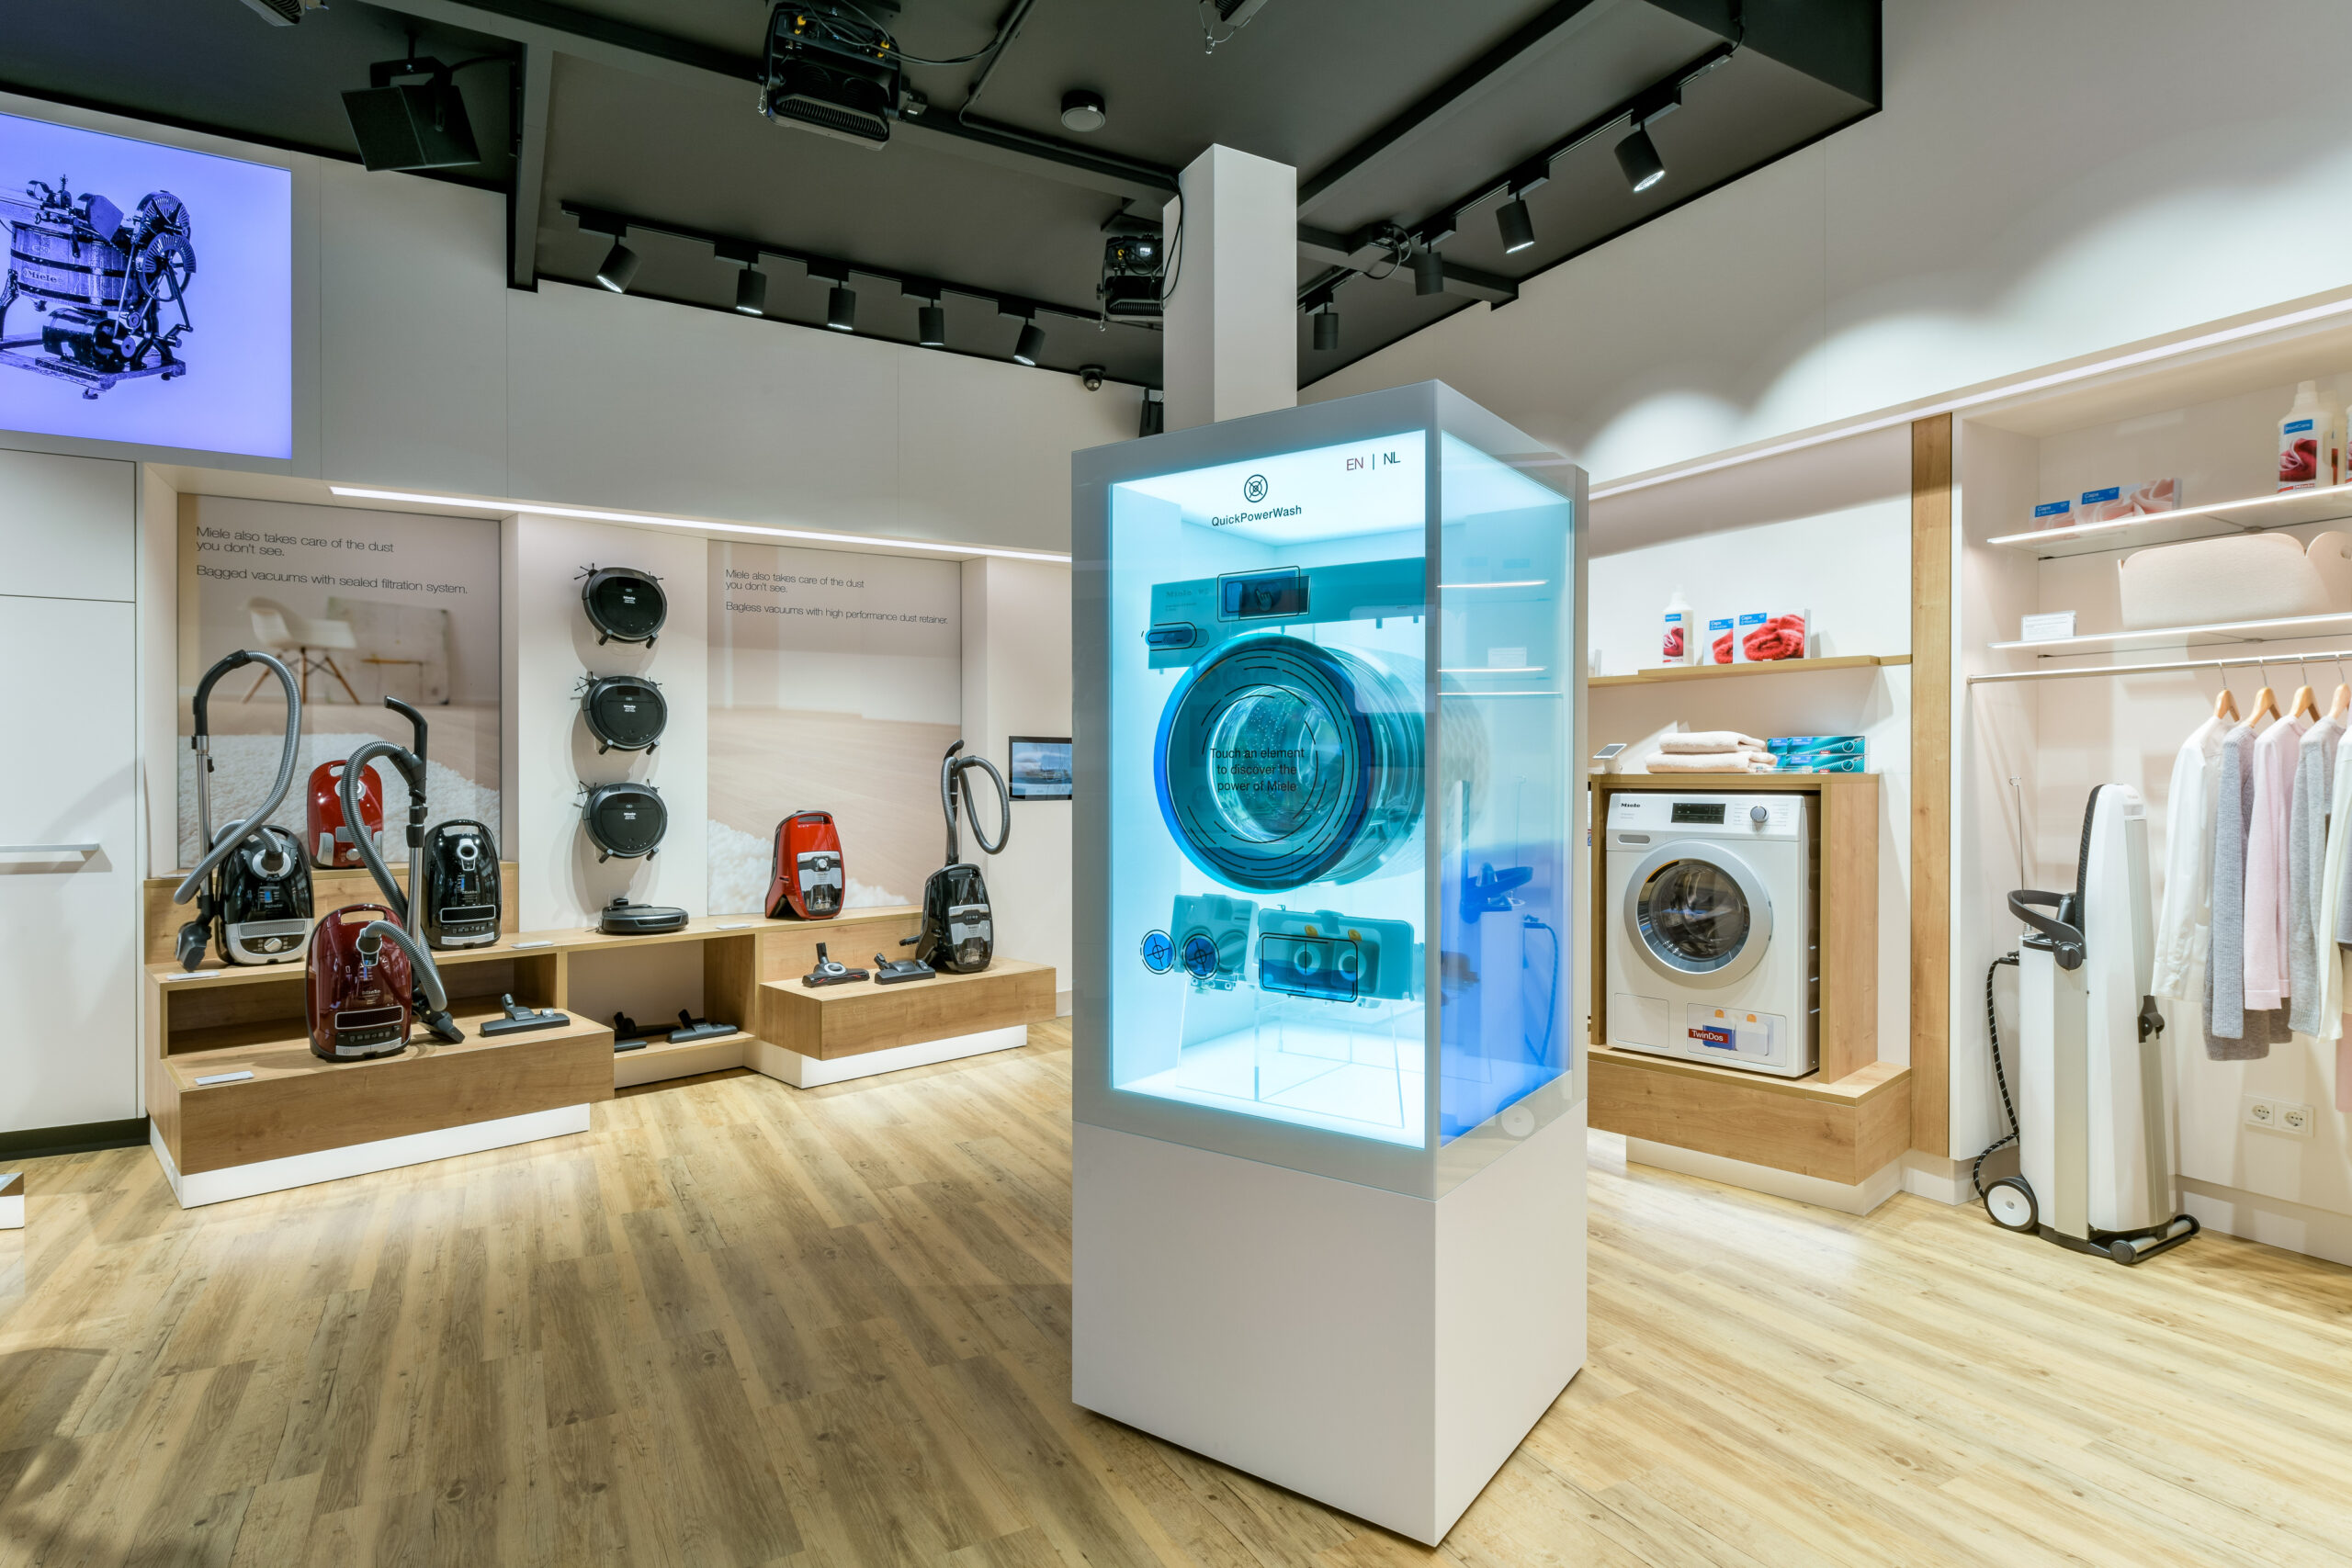 Virtual washing machine developed by xplace in the Miele Experience Center